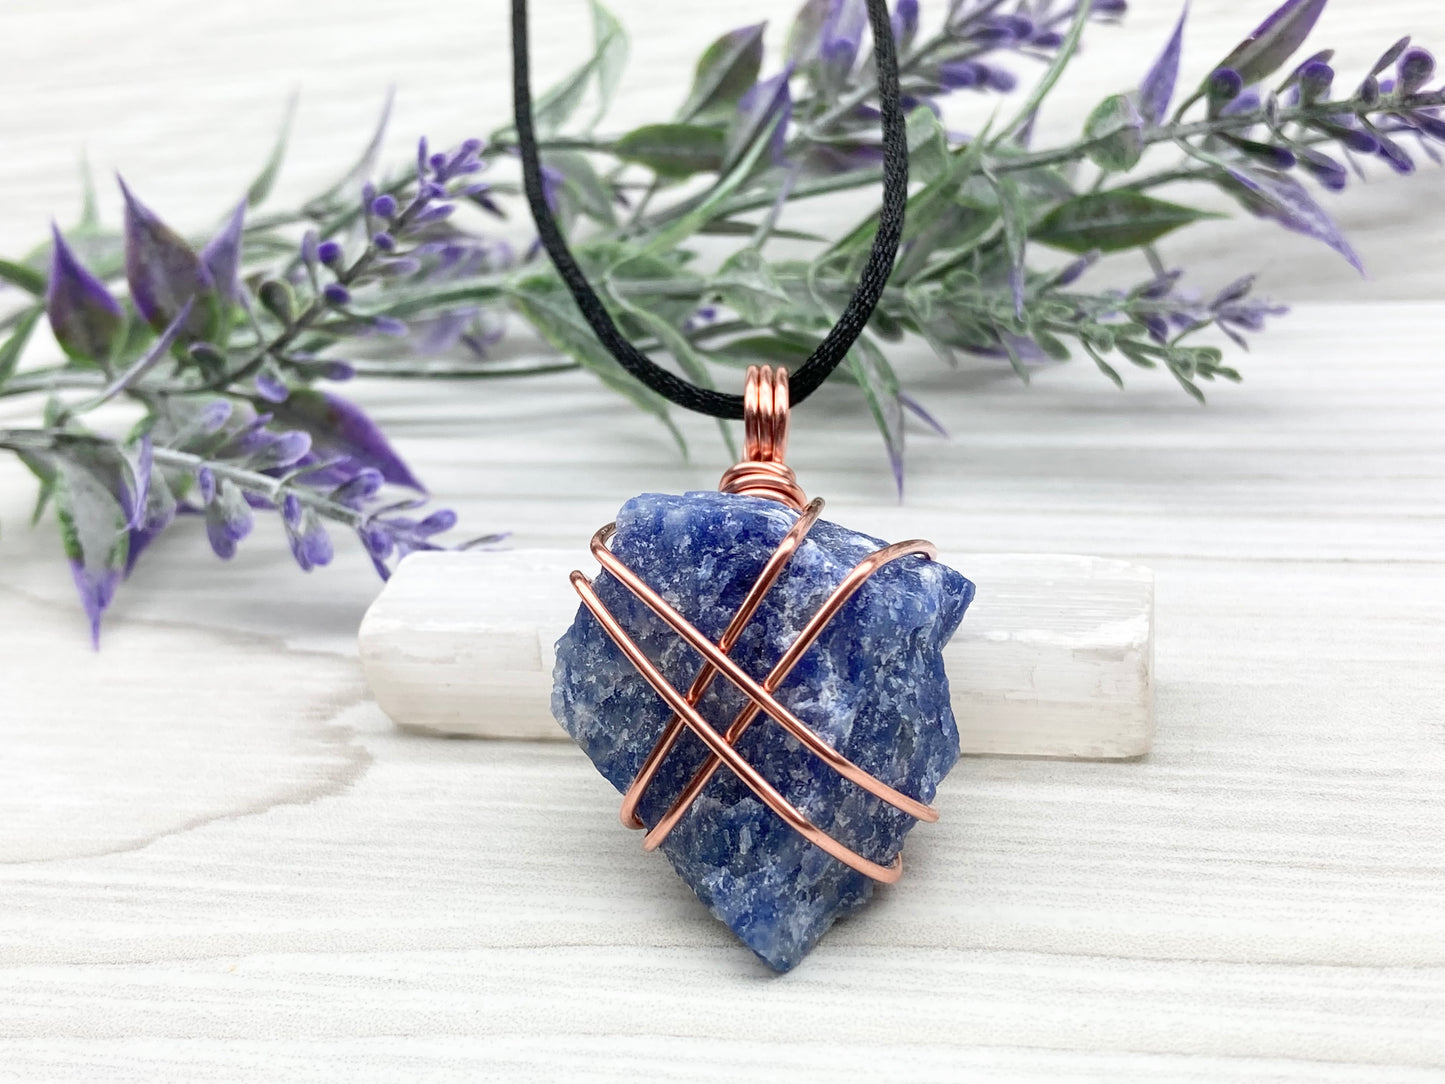 Raw Sodalite Necklace. Real Sodalite Crystal Hand Wrapped With Pure Copper Wire. Gemstone Is Blue With White In It. Comes On A Black Chain. Sagittarius Zodiac Stone Unisex Jewelry.